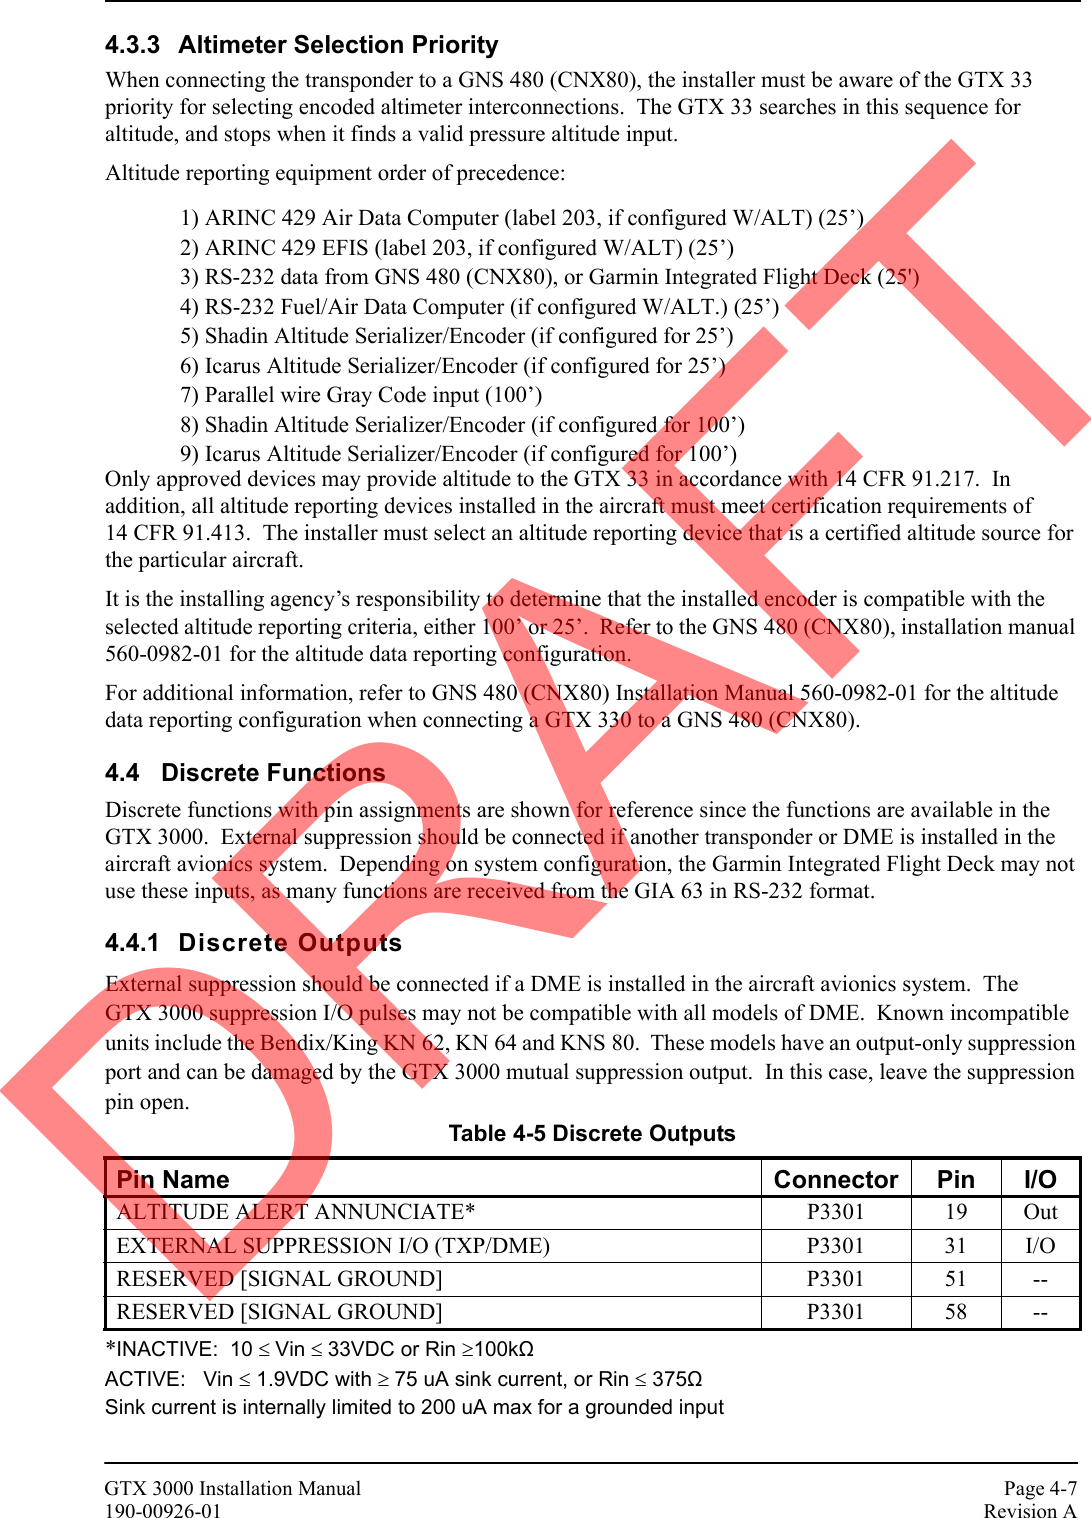 GTX 3000 Installation Manual Page 4-7190-00926-01 Revision A4.3.3 Altimeter Selection PriorityWhen connecting the transponder to a GNS 480 (CNX80), the installer must be aware of the GTX 33 priority for selecting encoded altimeter interconnections.  The GTX 33 searches in this sequence for altitude, and stops when it finds a valid pressure altitude input.Altitude reporting equipment order of precedence:1) ARINC 429 Air Data Computer (label 203, if configured W/ALT) (25’)2) ARINC 429 EFIS (label 203, if configured W/ALT) (25’)3) RS-232 data from GNS 480 (CNX80), or Garmin Integrated Flight Deck (25&apos;)4) RS-232 Fuel/Air Data Computer (if configured W/ALT.) (25’)5) Shadin Altitude Serializer/Encoder (if configured for 25’)6) Icarus Altitude Serializer/Encoder (if configured for 25’)7) Parallel wire Gray Code input (100’)8) Shadin Altitude Serializer/Encoder (if configured for 100’)9) Icarus Altitude Serializer/Encoder (if configured for 100’)Only approved devices may provide altitude to the GTX 33 in accordance with 14 CFR 91.217.  In addition, all altitude reporting devices installed in the aircraft must meet certification requirements of 14 CFR 91.413.  The installer must select an altitude reporting device that is a certified altitude source for the particular aircraft.It is the installing agency’s responsibility to determine that the installed encoder is compatible with the selected altitude reporting criteria, either 100’ or 25’.  Refer to the GNS 480 (CNX80), installation manual 560-0982-01 for the altitude data reporting configuration.For additional information, refer to GNS 480 (CNX80) Installation Manual 560-0982-01 for the altitude data reporting configuration when connecting a GTX 330 to a GNS 480 (CNX80).4.4 Discrete FunctionsDiscrete functions with pin assignments are shown for reference since the functions are available in the GTX 3000.  External suppression should be connected if another transponder or DME is installed in the aircraft avionics system.  Depending on system configuration, the Garmin Integrated Flight Deck may not use these inputs, as many functions are received from the GIA 63 in RS-232 format.4.4.1 Discrete OutputsExternal suppression should be connected if a DME is installed in the aircraft avionics system.  The GTX 3000 suppression I/O pulses may not be compatible with all models of DME.  Known incompatible units include the Bendix/King KN 62, KN 64 and KNS 80.  These models have an output-only suppression port and can be damaged by the GTX 3000 mutual suppression output.  In this case, leave the suppression pin open.*INACTIVE:  10 ≤ Vin ≤ 33VDC or Rin ≥100kΩ  ACTIVE:   Vin ≤ 1.9VDC with ≥ 75 uA sink current, or Rin ≤ 375Ω Sink current is internally limited to 200 uA max for a grounded input Table 4-5 Discrete OutputsPin Name Connector Pin I/OALTITUDE ALERT ANNUNCIATE* P3301 19 OutEXTERNAL SUPPRESSION I/O (TXP/DME) P3301 31 I/ORESERVED [SIGNAL GROUND] P3301 51 --RESERVED [SIGNAL GROUND] P3301 58 --DRAFT